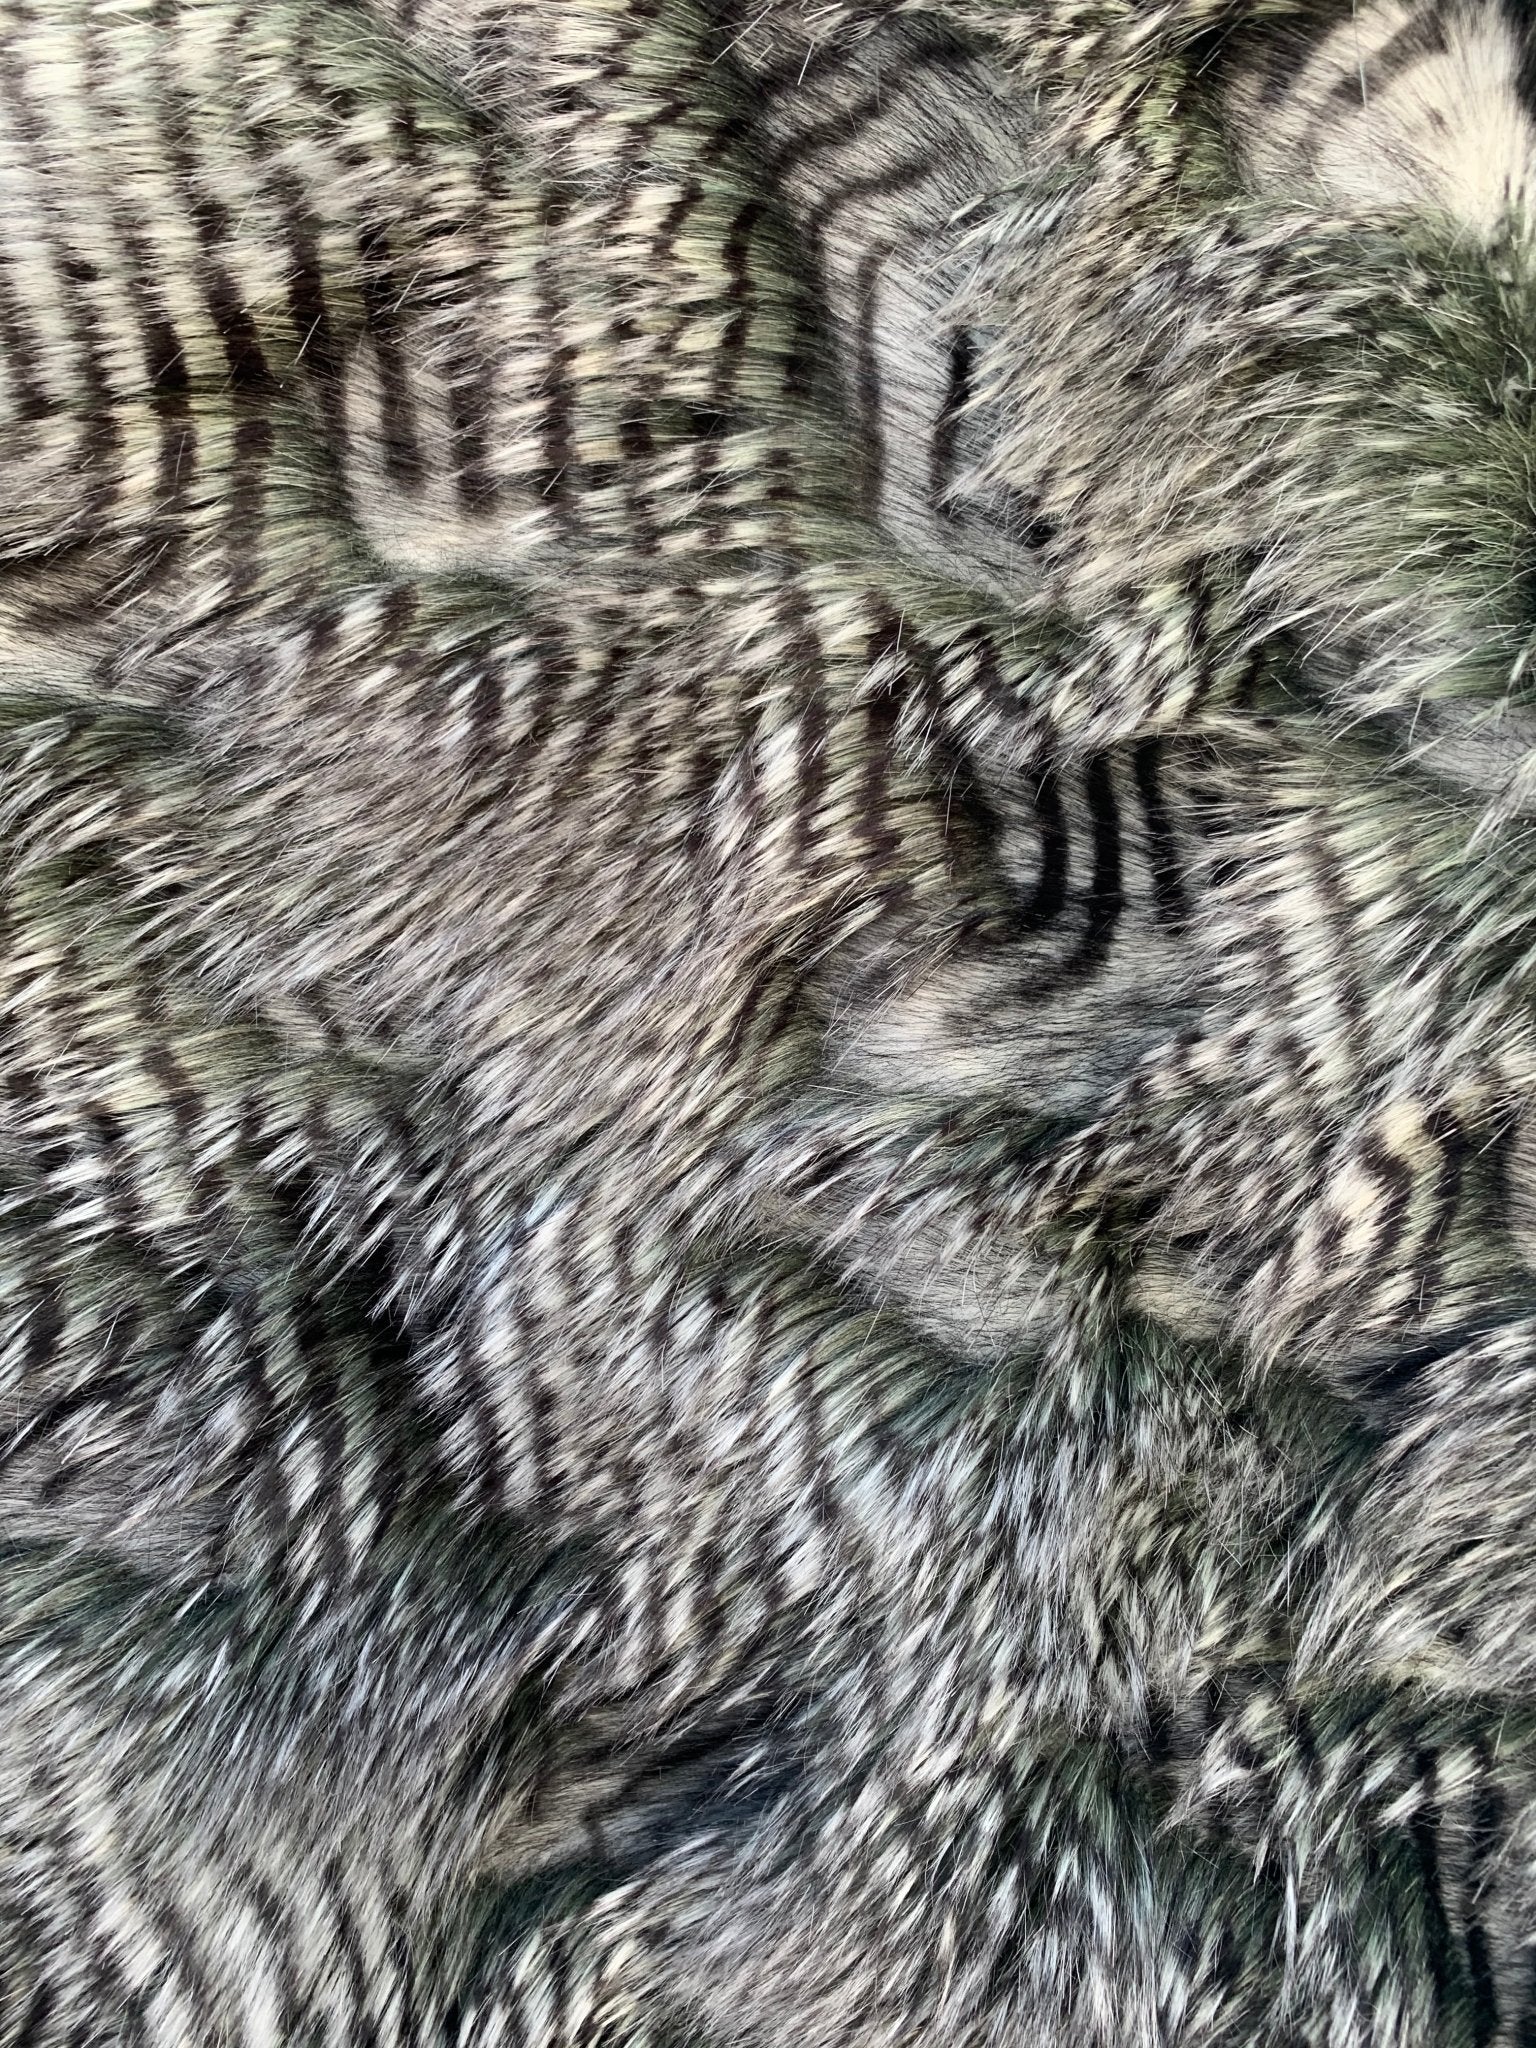 Faux Fake Fur Feathered Bird Long Pile Fabric | Faux Fur MaterialICEFABRICICE FABRICSOlive GreenBy The Yard (60 inches Wide)Faux Fake Fur Feathered Bird Long Pile Fabric | Faux Fur Material ICEFABRIC Olive Green